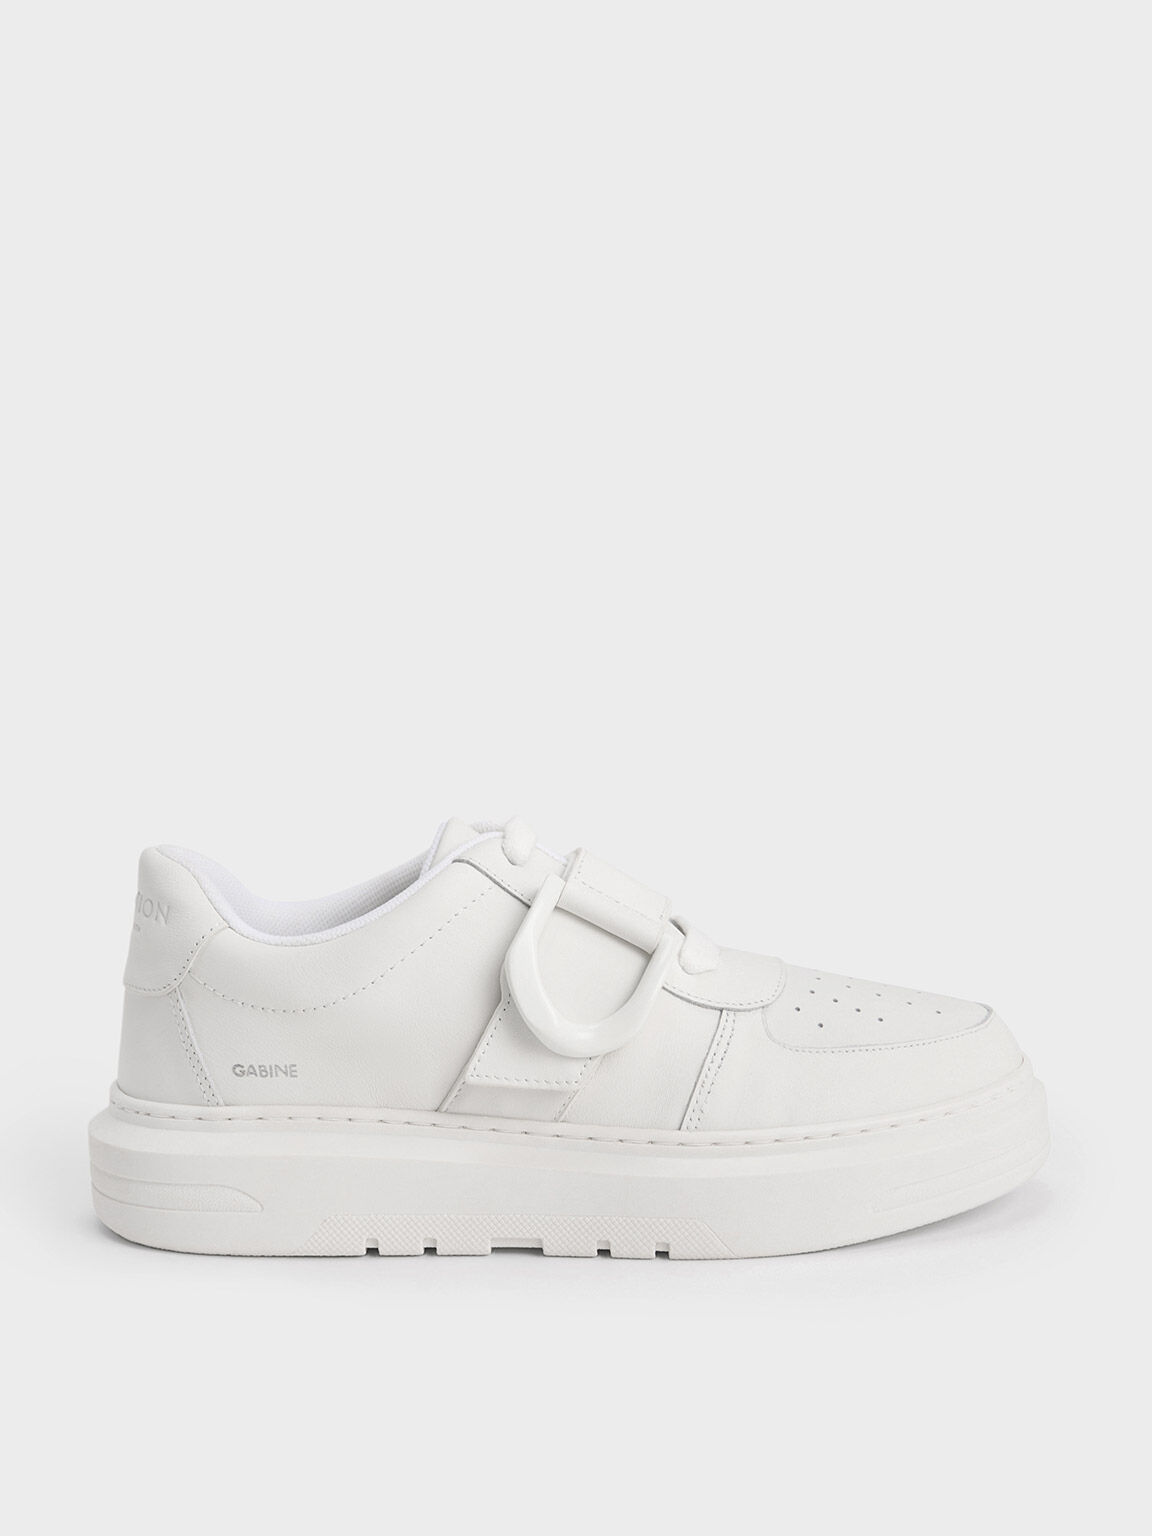 White Gabine Leather Low-Top Sneakers - CHARLES & KEITH US